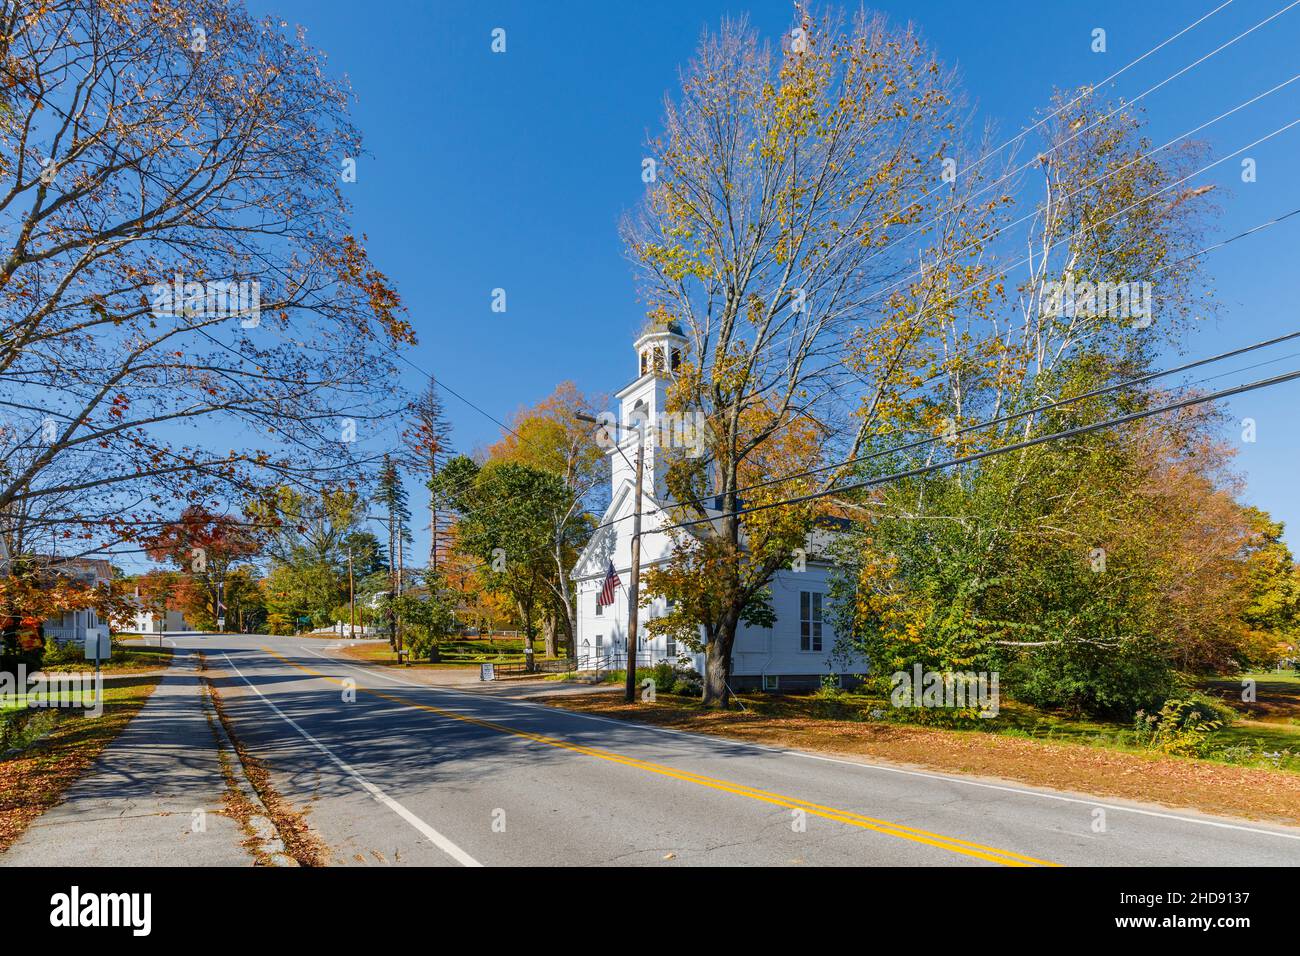 Greek Revival architecture Sandwich Methodist Church Meeting House Community Church, Center Sandwich, a village in New Hampshire, New England, USA Stock Photo